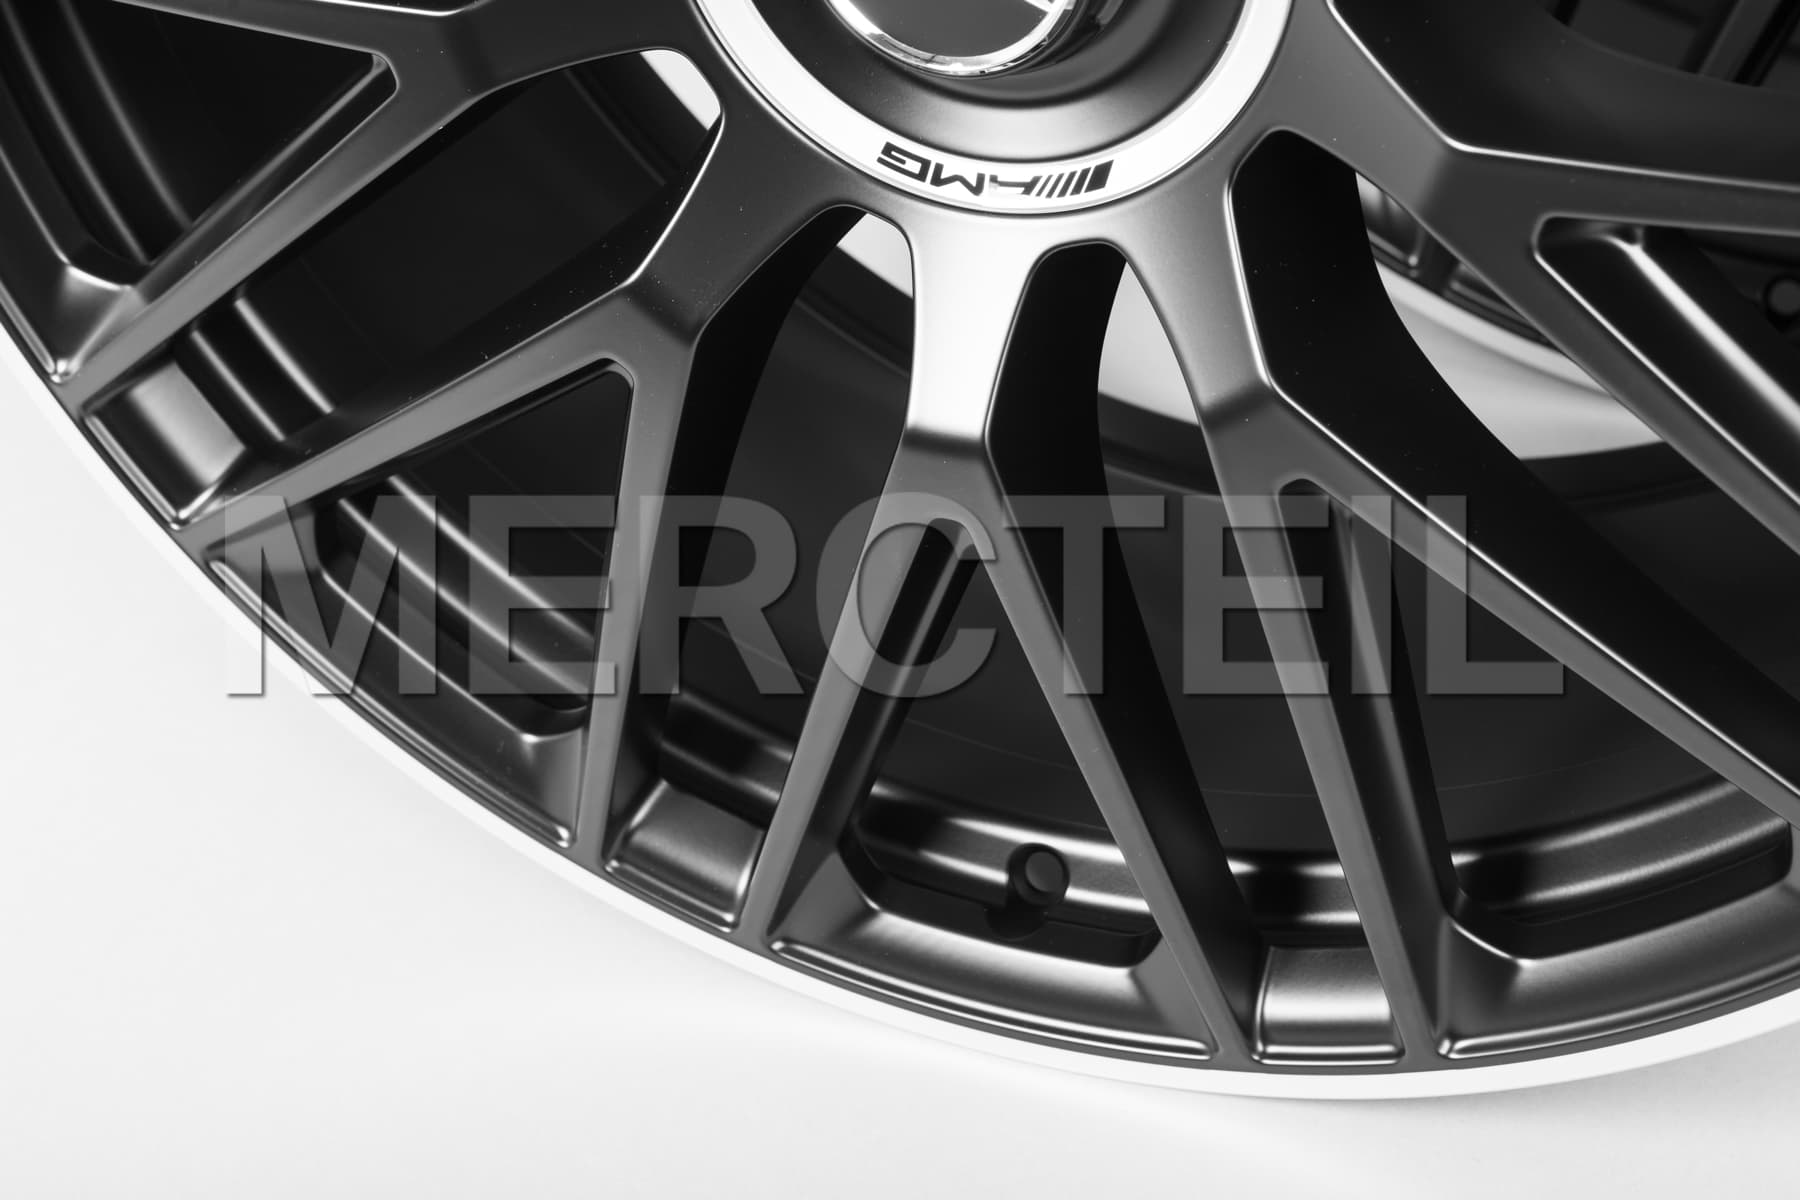 GLS 63 AMG 23 Inch Black Forged Rims Genuine Mercedes AMG (part number: 	
A16740185007X71)